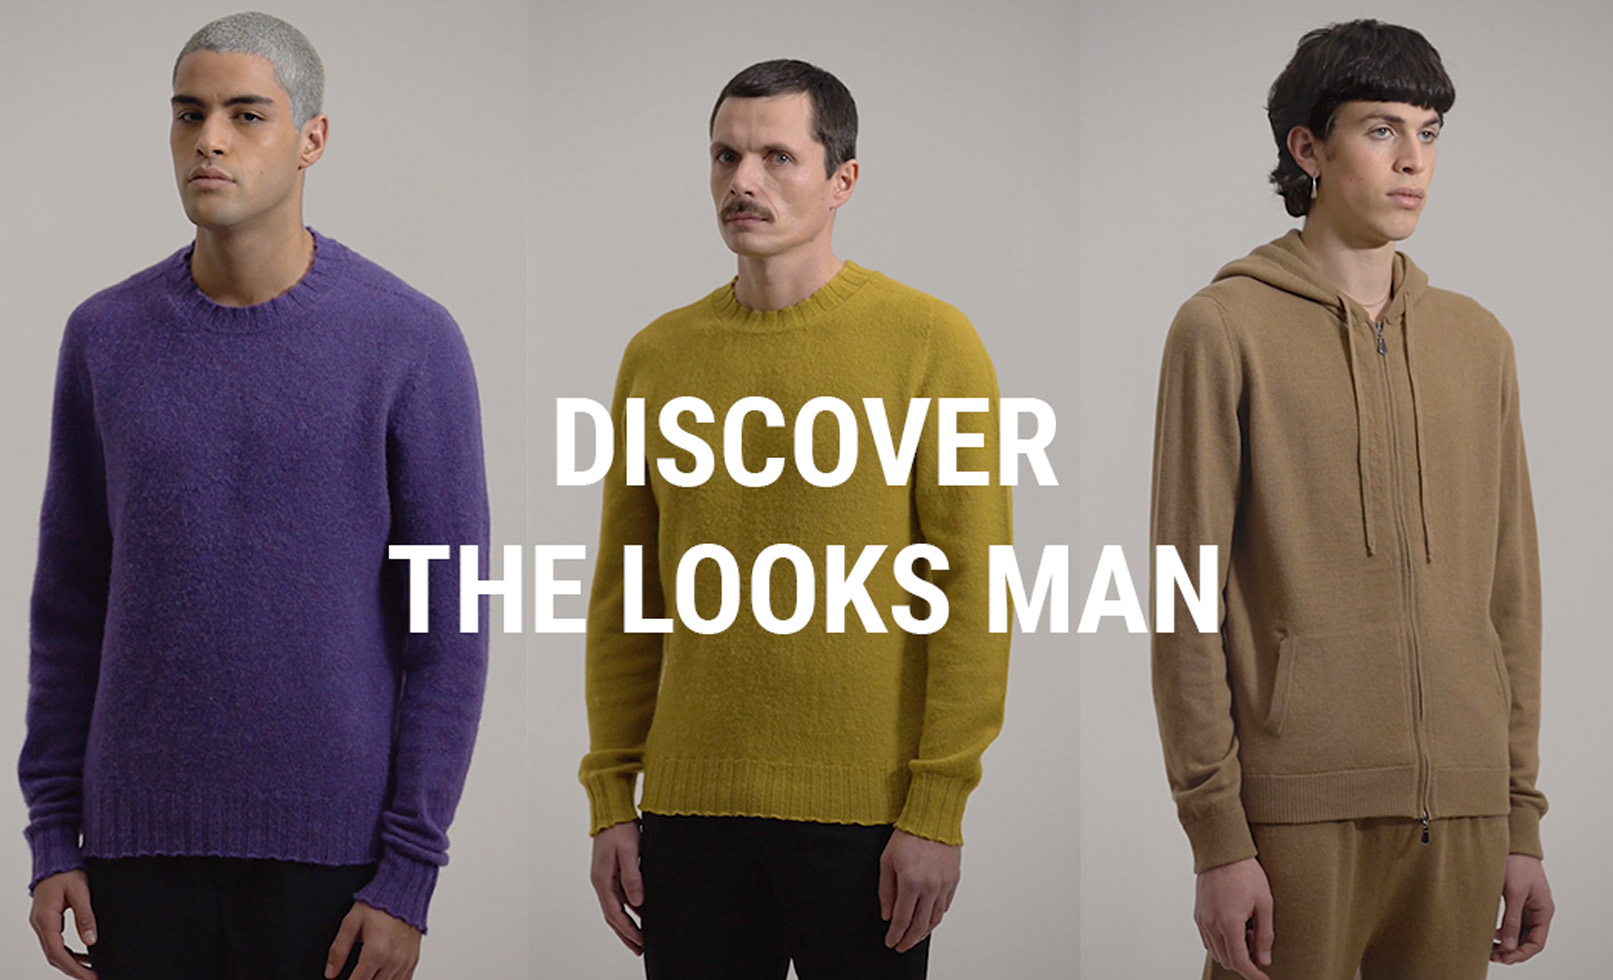 Discover the looks man